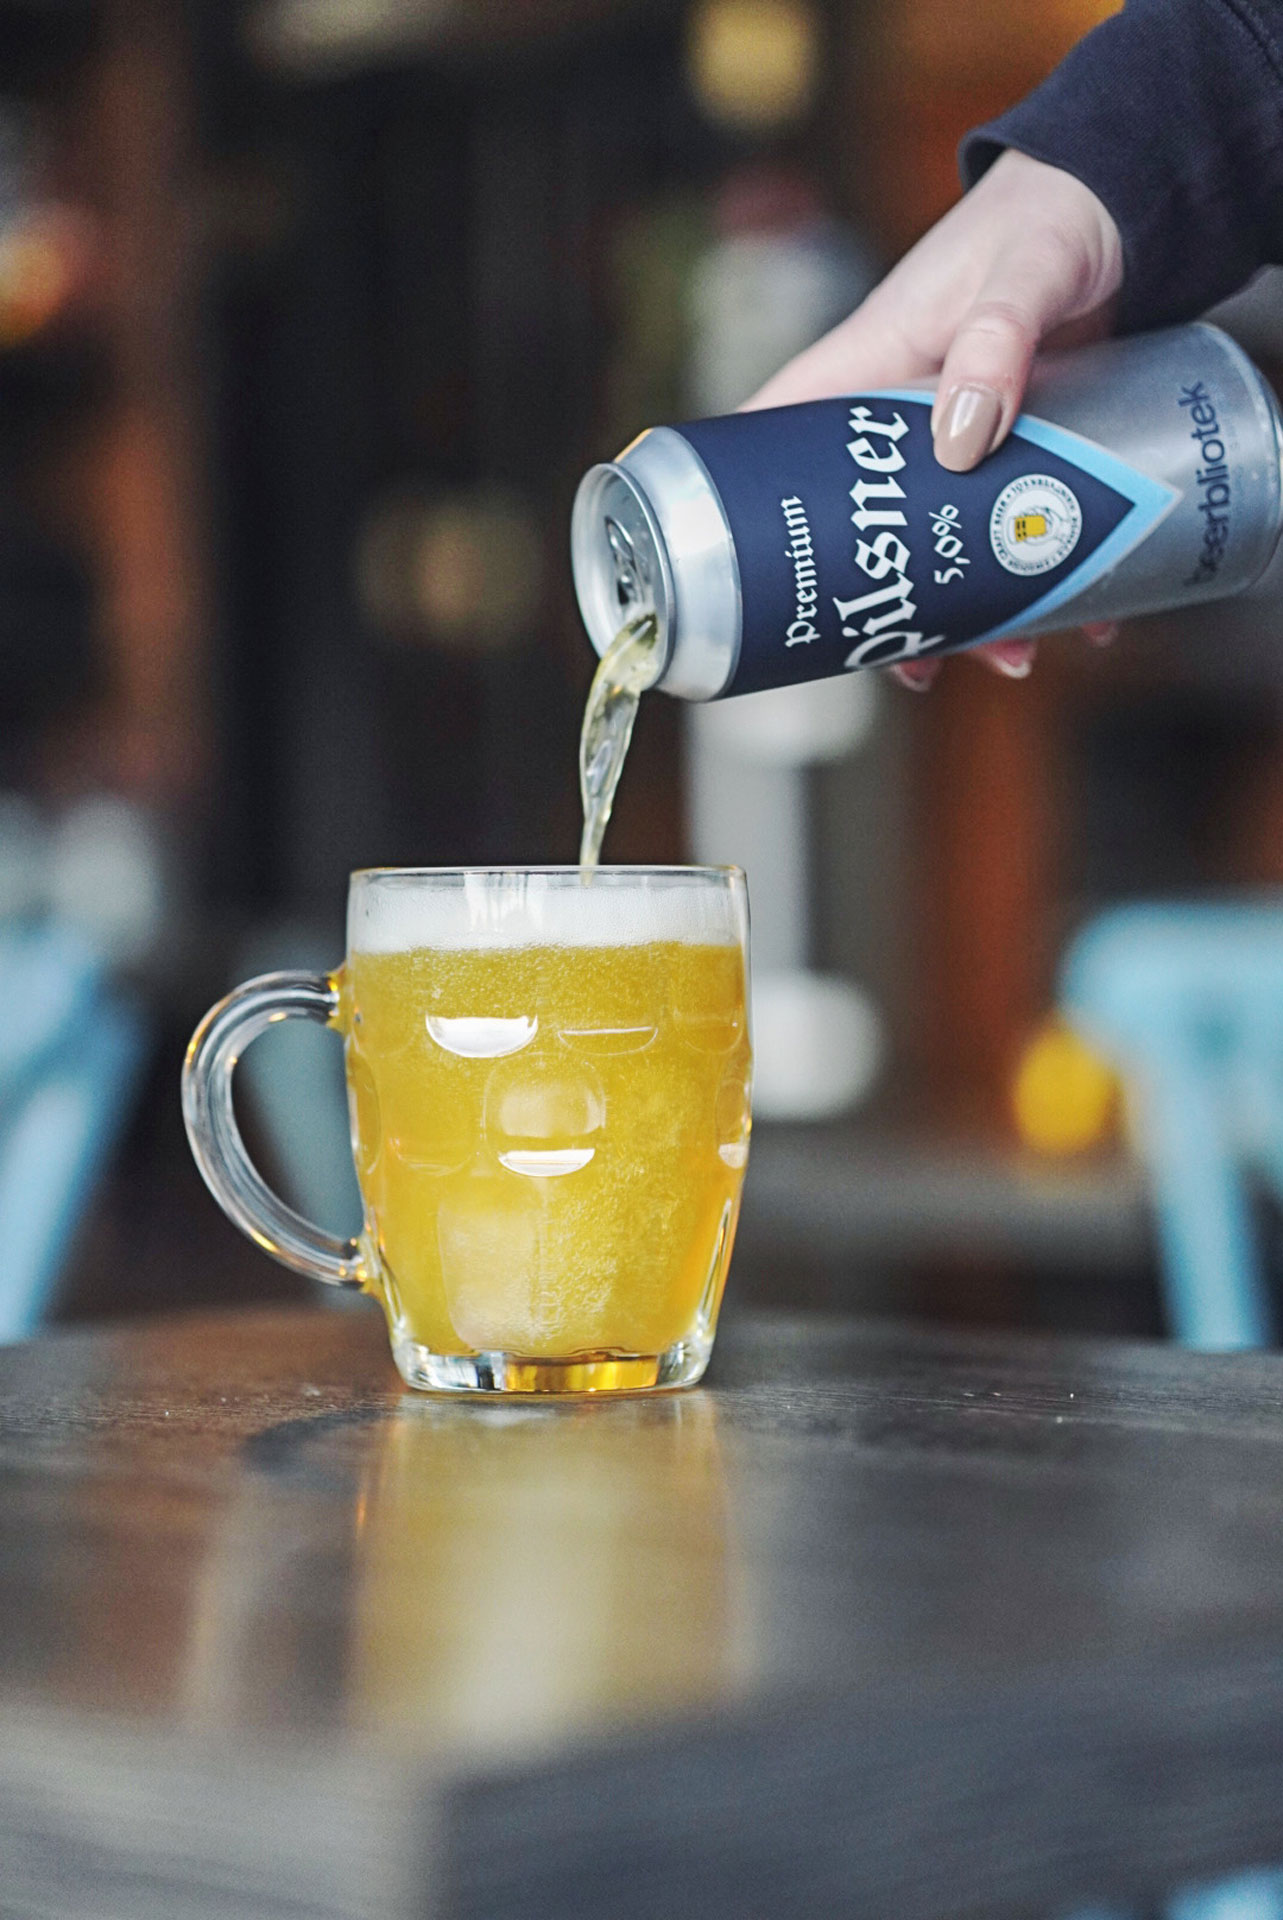 A photo of a can being poured into a glass of Premium Pilsner, a Pilsner, brewed by Swedish Craft Beer brewery, Beerbliotek, in Gothenburg. Premium Pilsner is Beerbliotek's first 500ml Can.